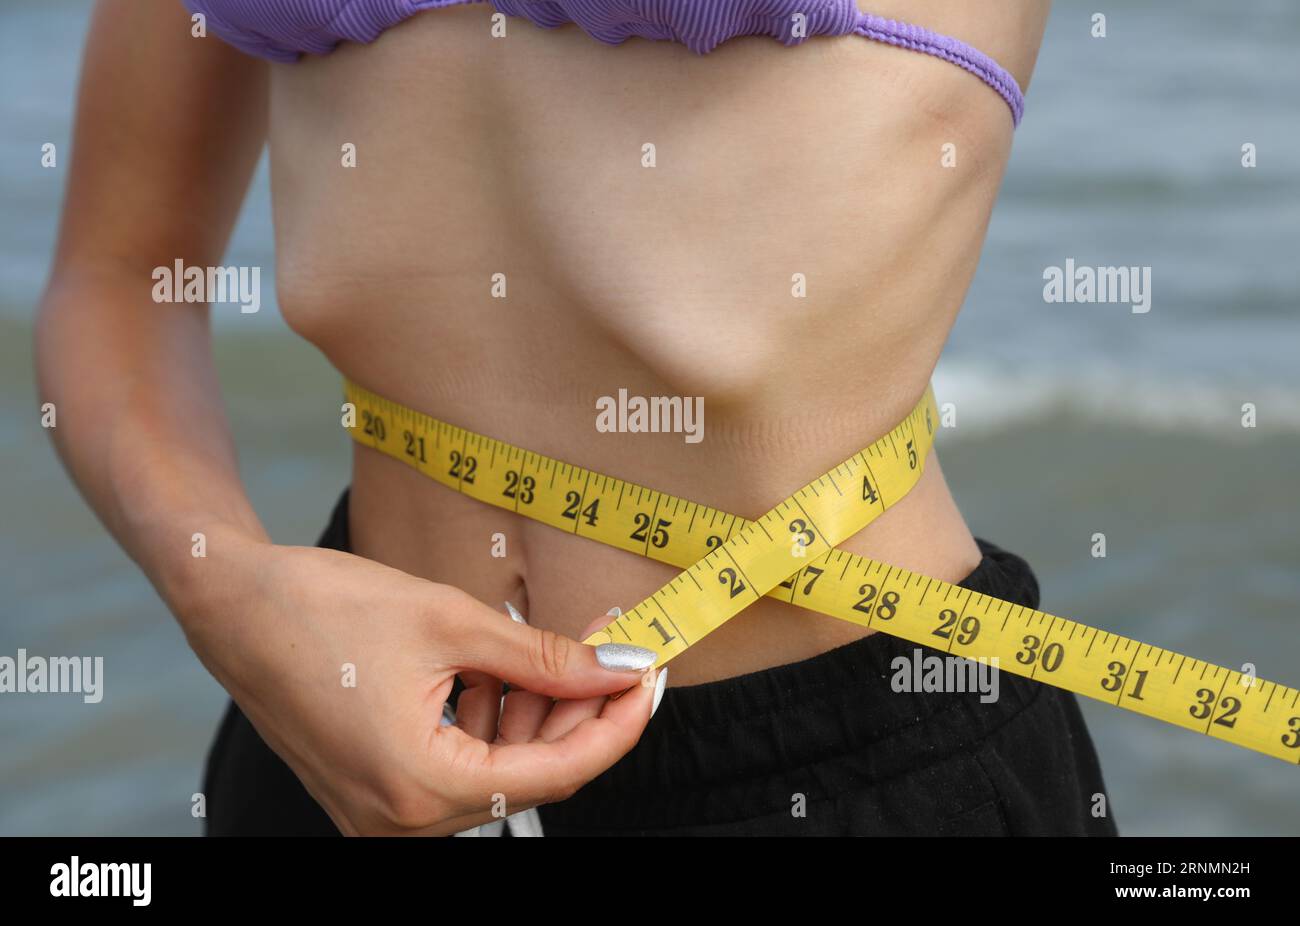 skinny young girl with eating disorder measuring ther waistline Stock Photo